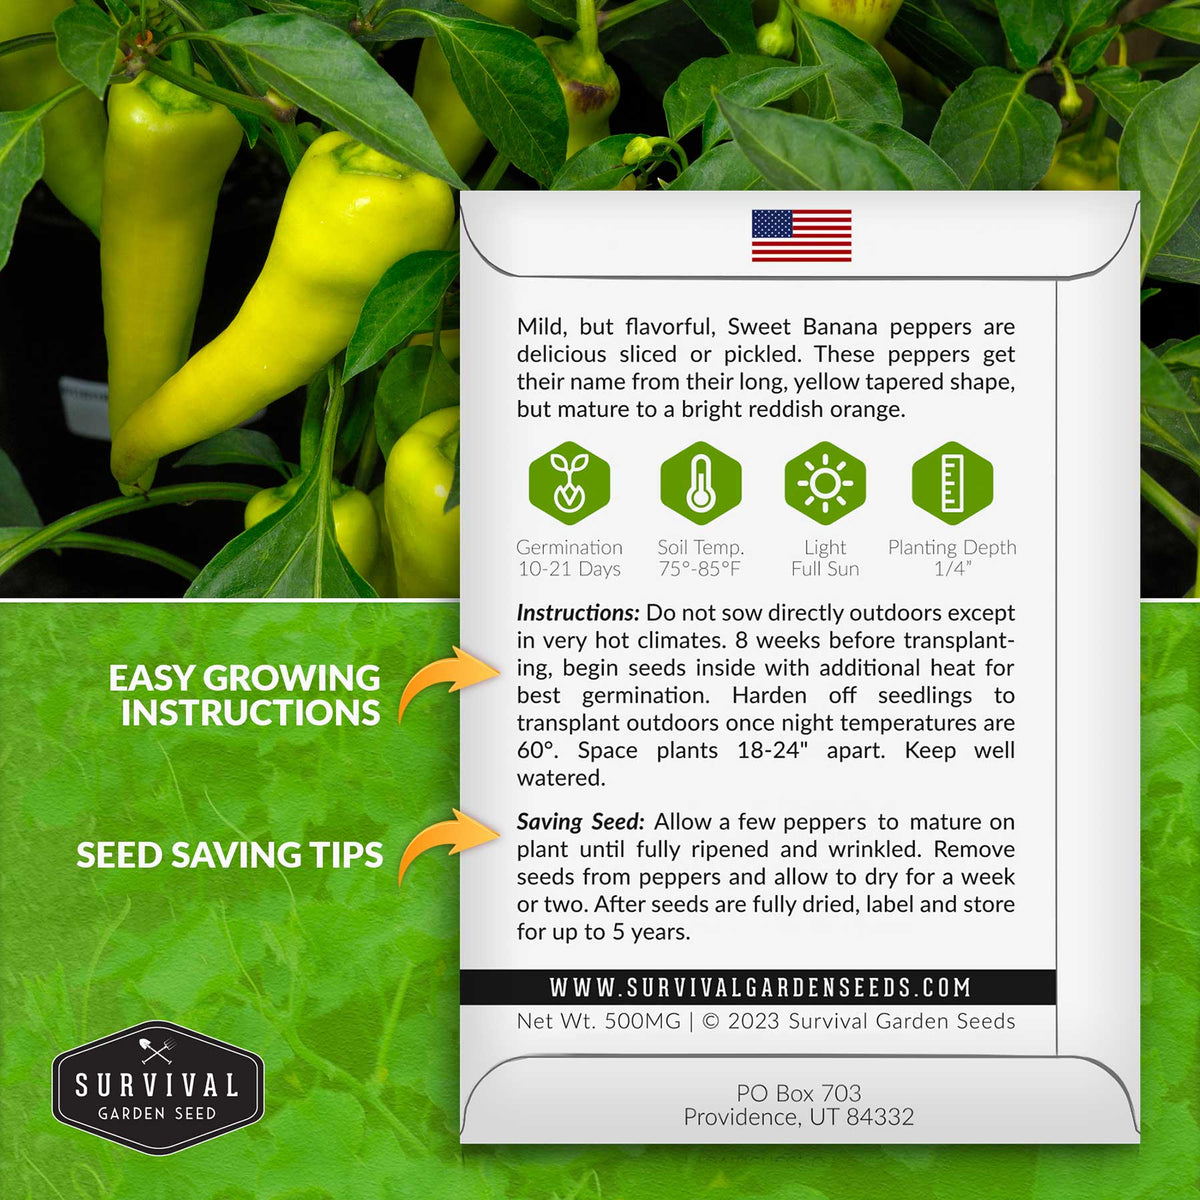 Sweet Banana Pepper seed planting instructions